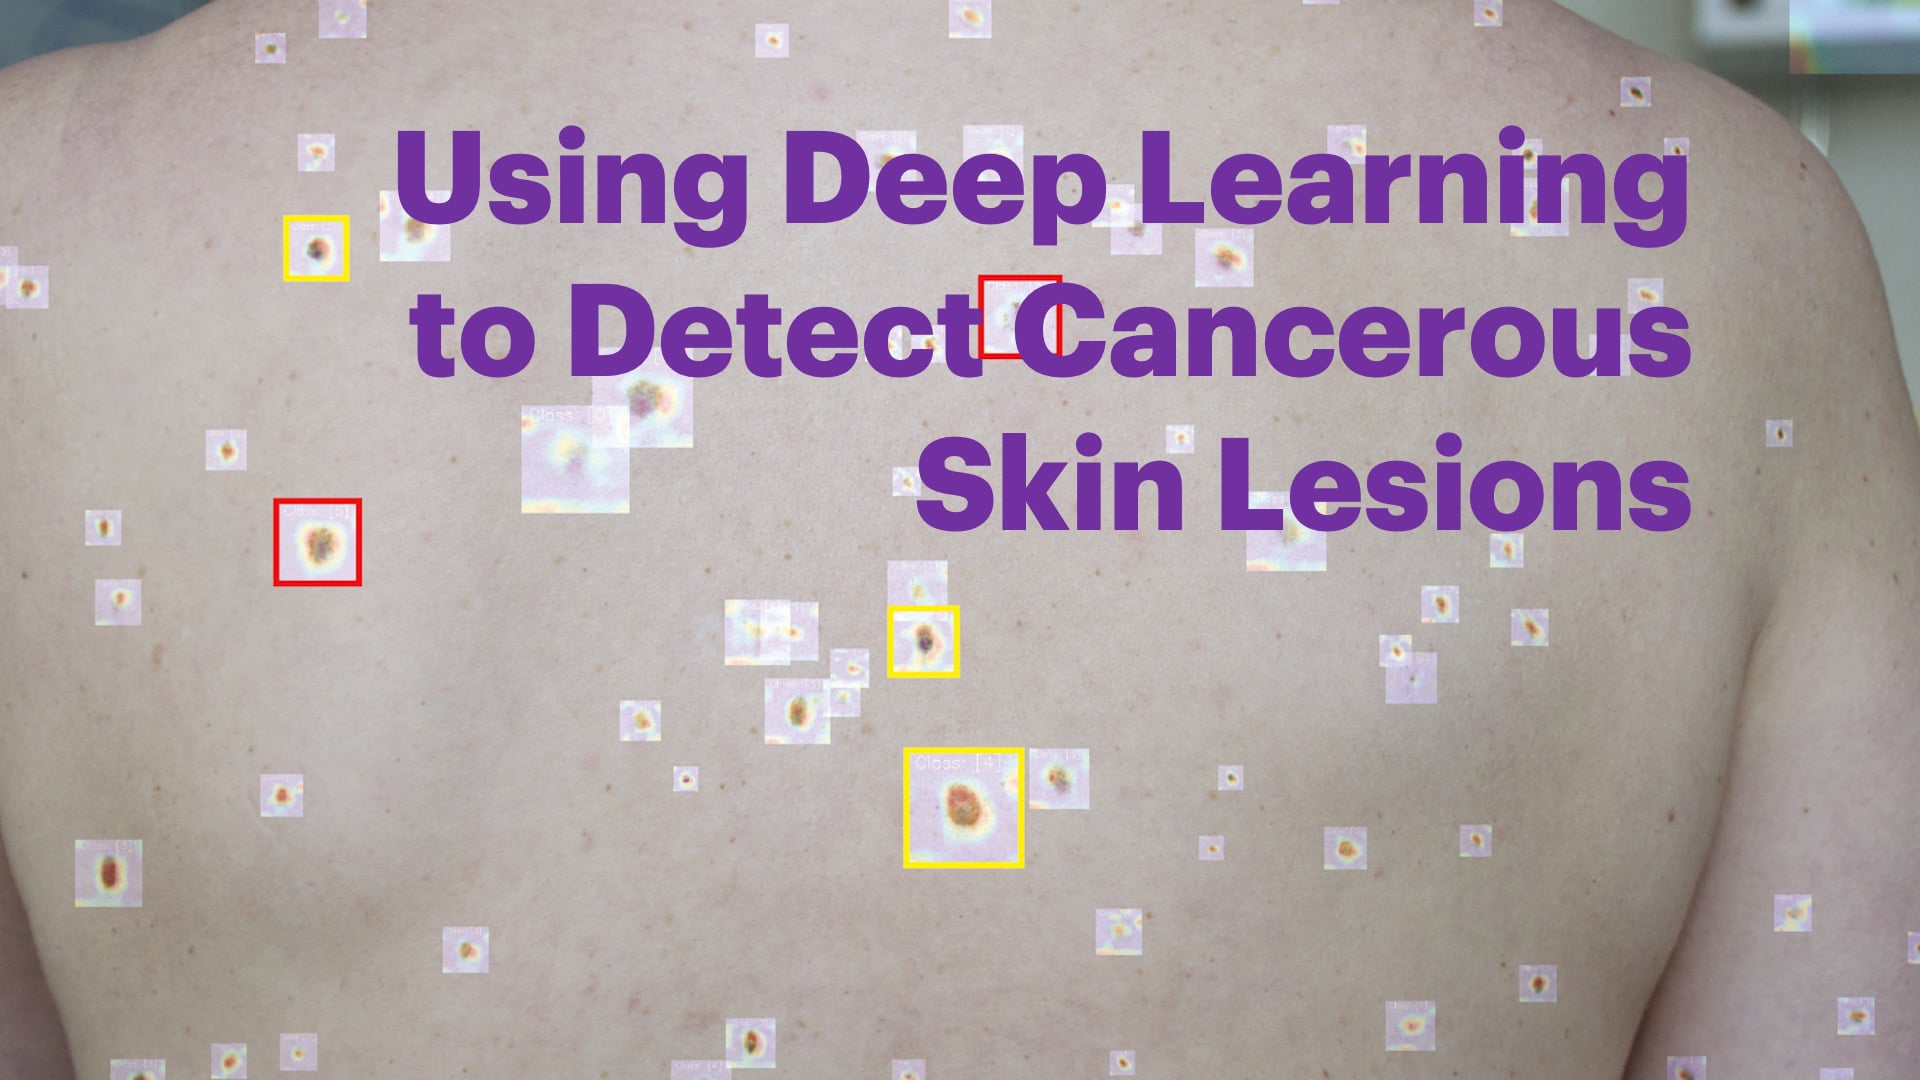 Using deep learning to detect cancerous skin lesions